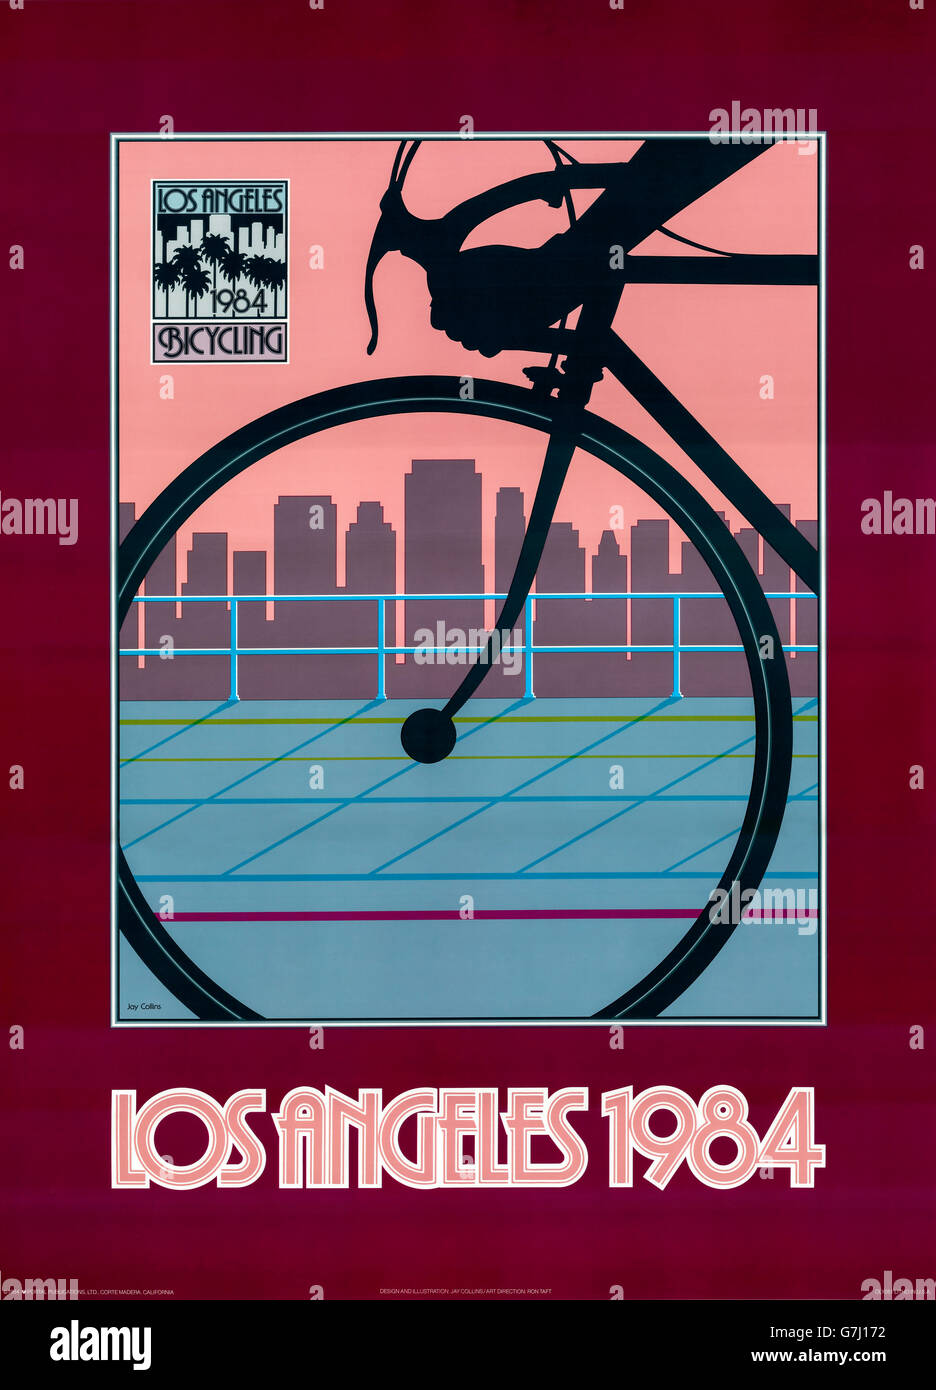 Los Angeles 1984 Olympic Ciclismo Poster Foto Stock